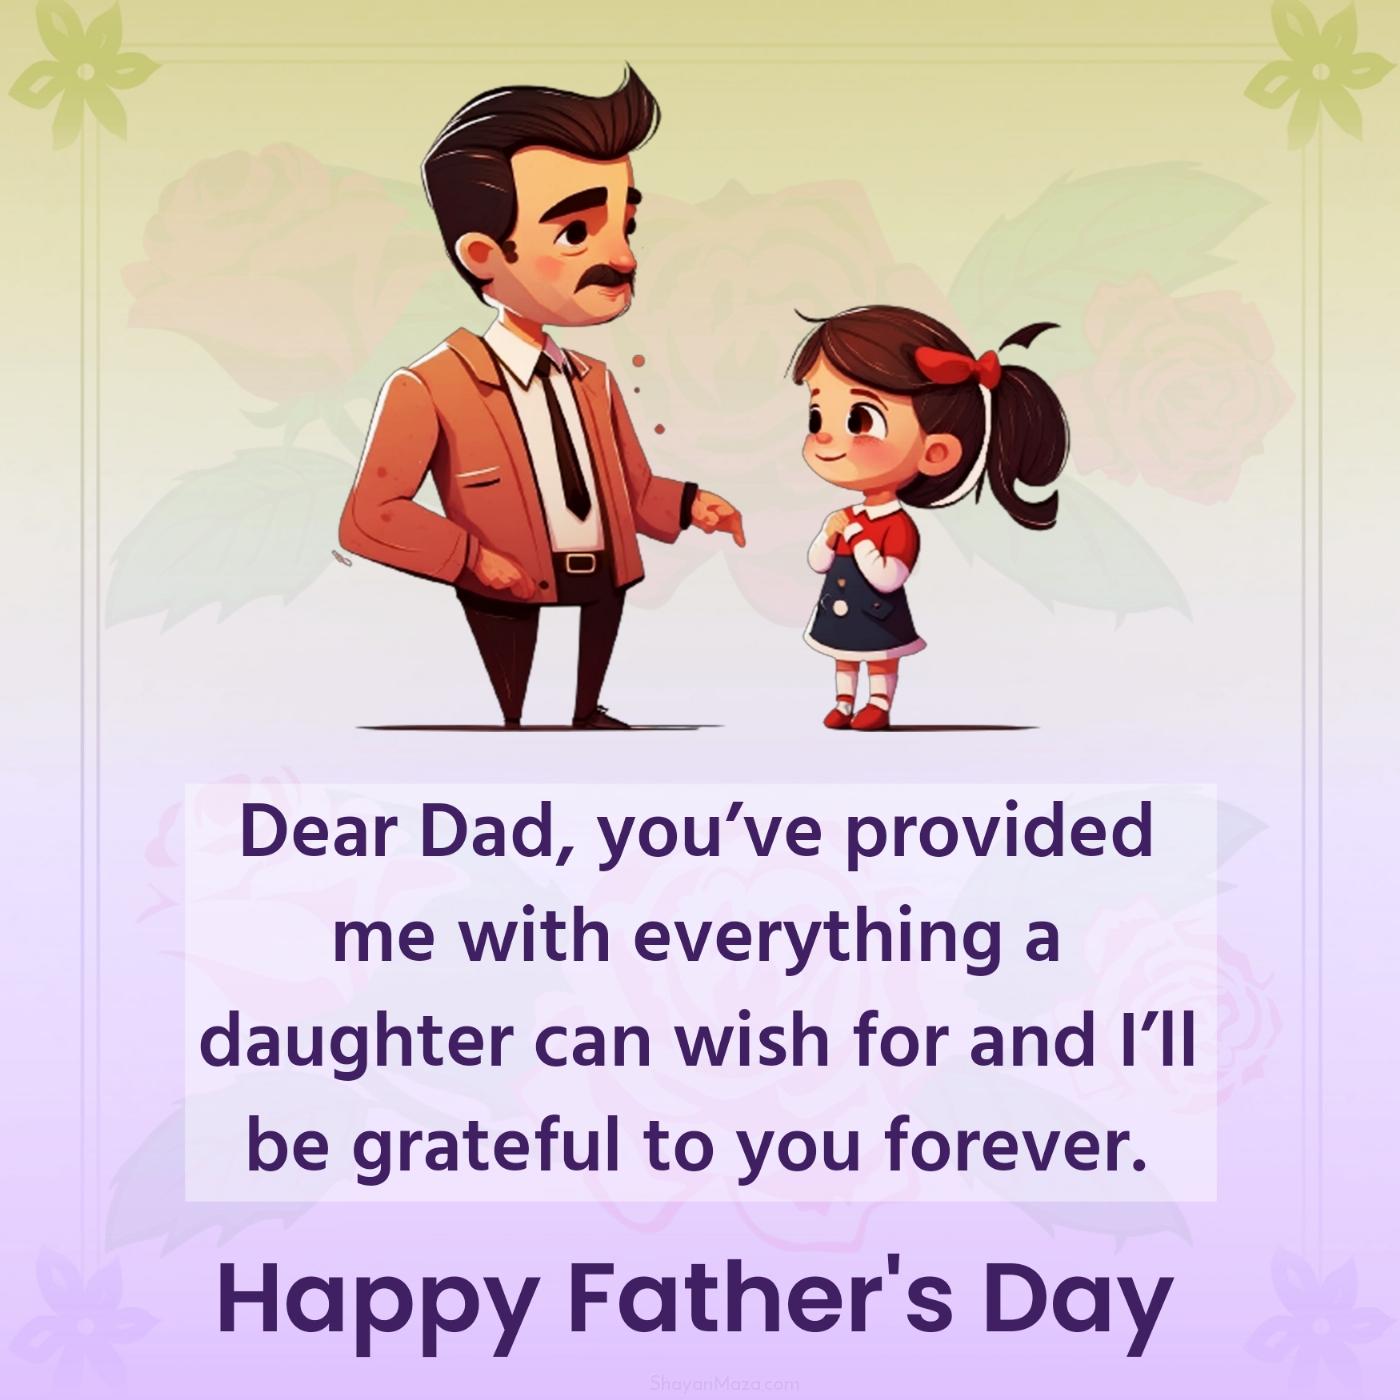 Dear Dad youve provided me with everything a daughter